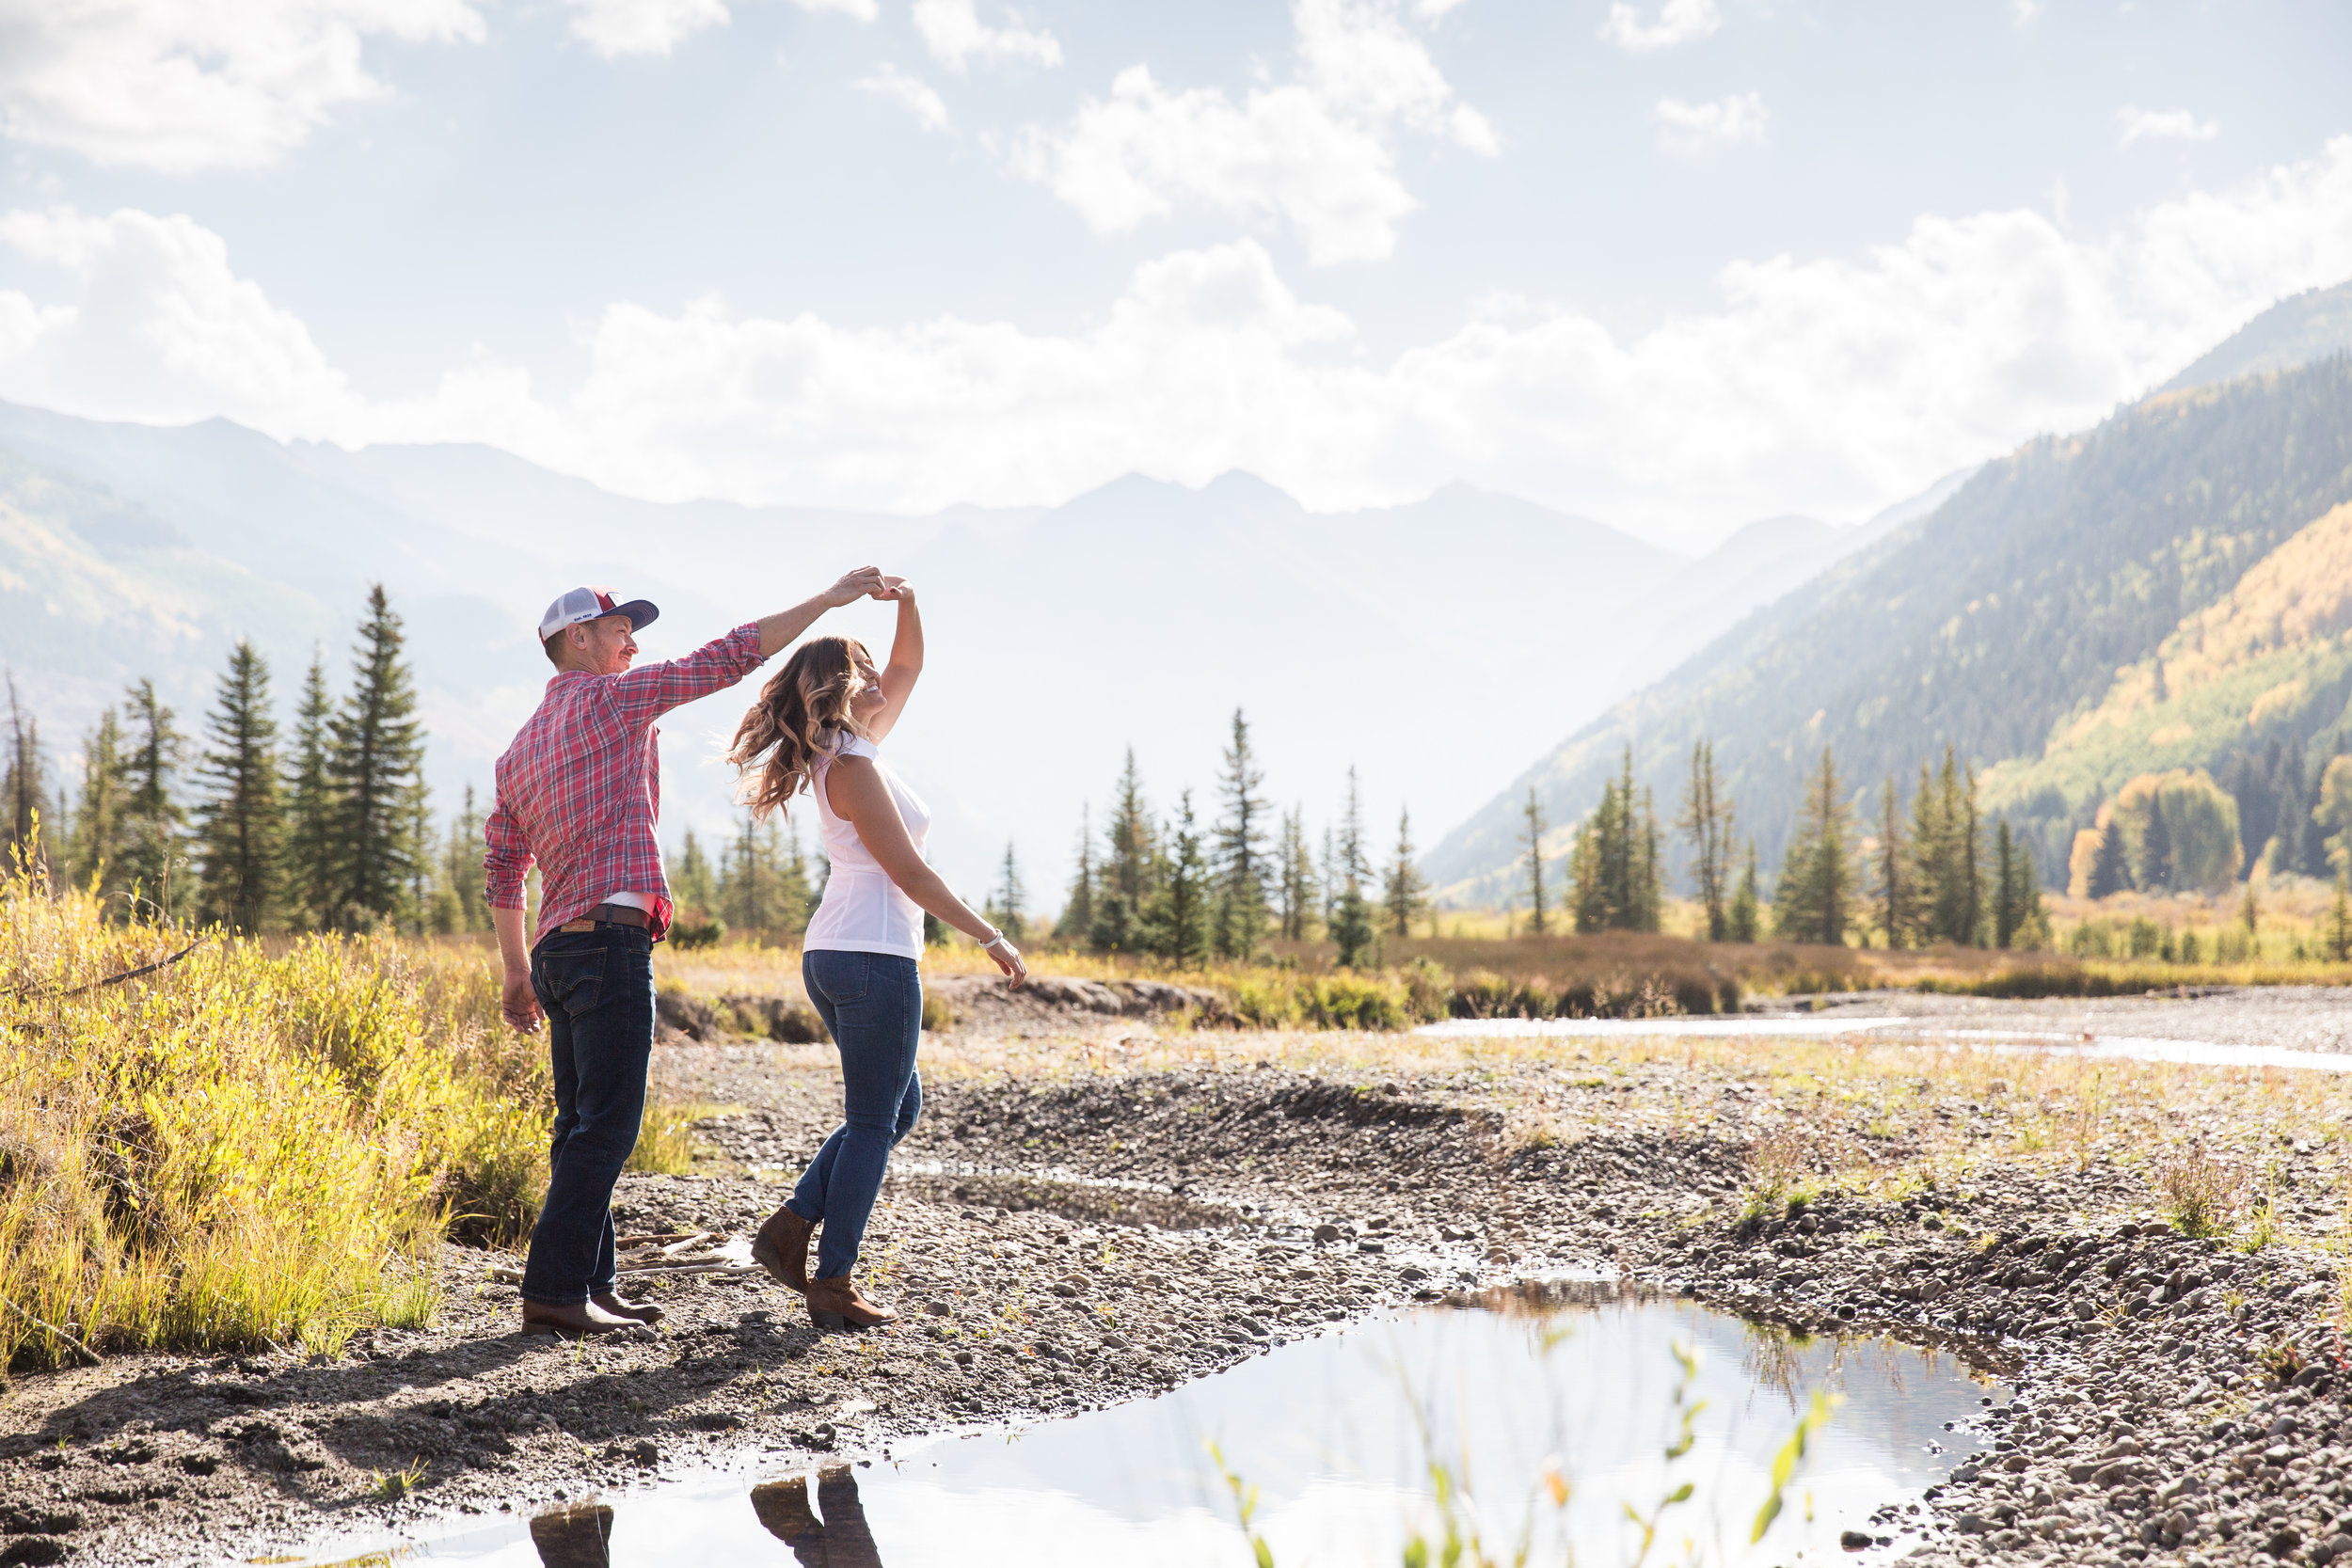 Telluride Engagement Photography - Telluride Proposal (Copy)